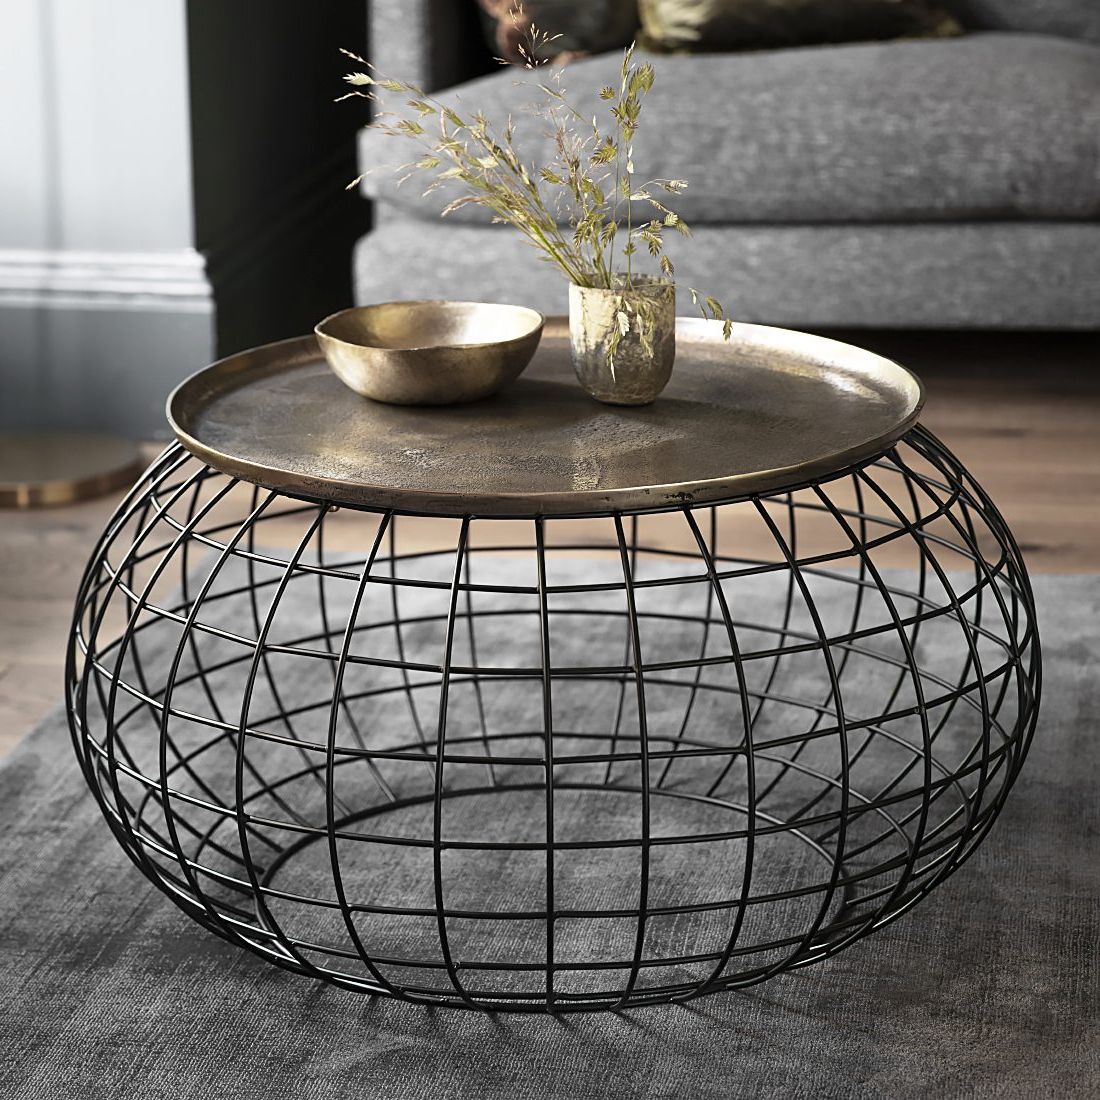 Round Metal Cage Coffee Table With Gold Tray Top Intended For Popular Antique Brass Aluminum Round Coffee Tables (View 14 of 20)